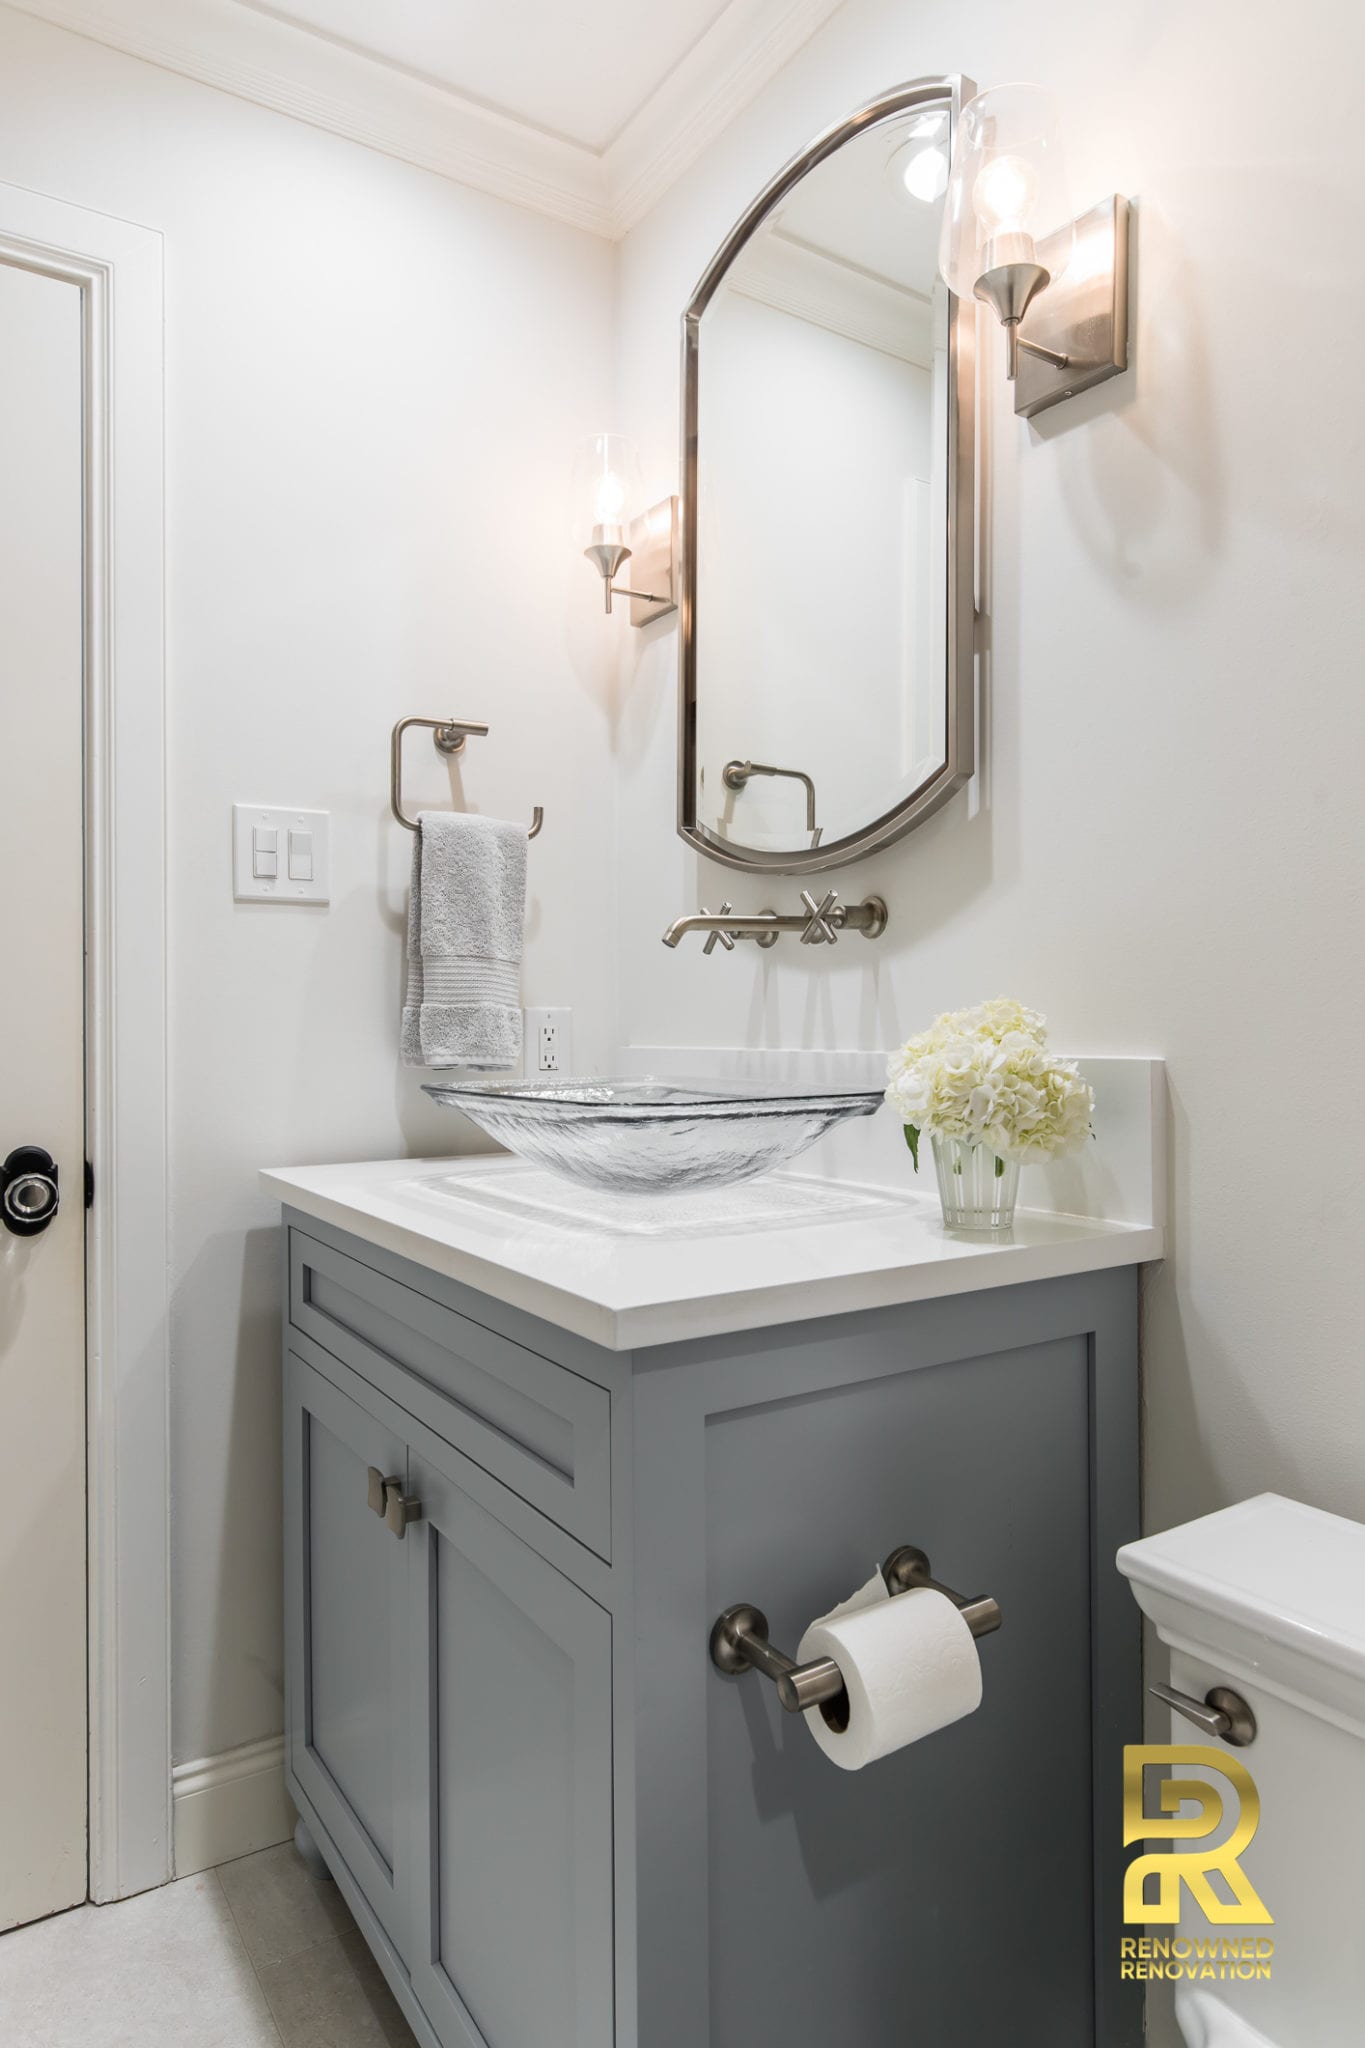 What Are The Best Materials For Bathroom Vanity Countertops? — Toulmin  Kitchen & Bath  Custom Cabinets, Kitchens and Bathroom Design & Remodeling  in Tuscaloosa and Birmingham, Alabama